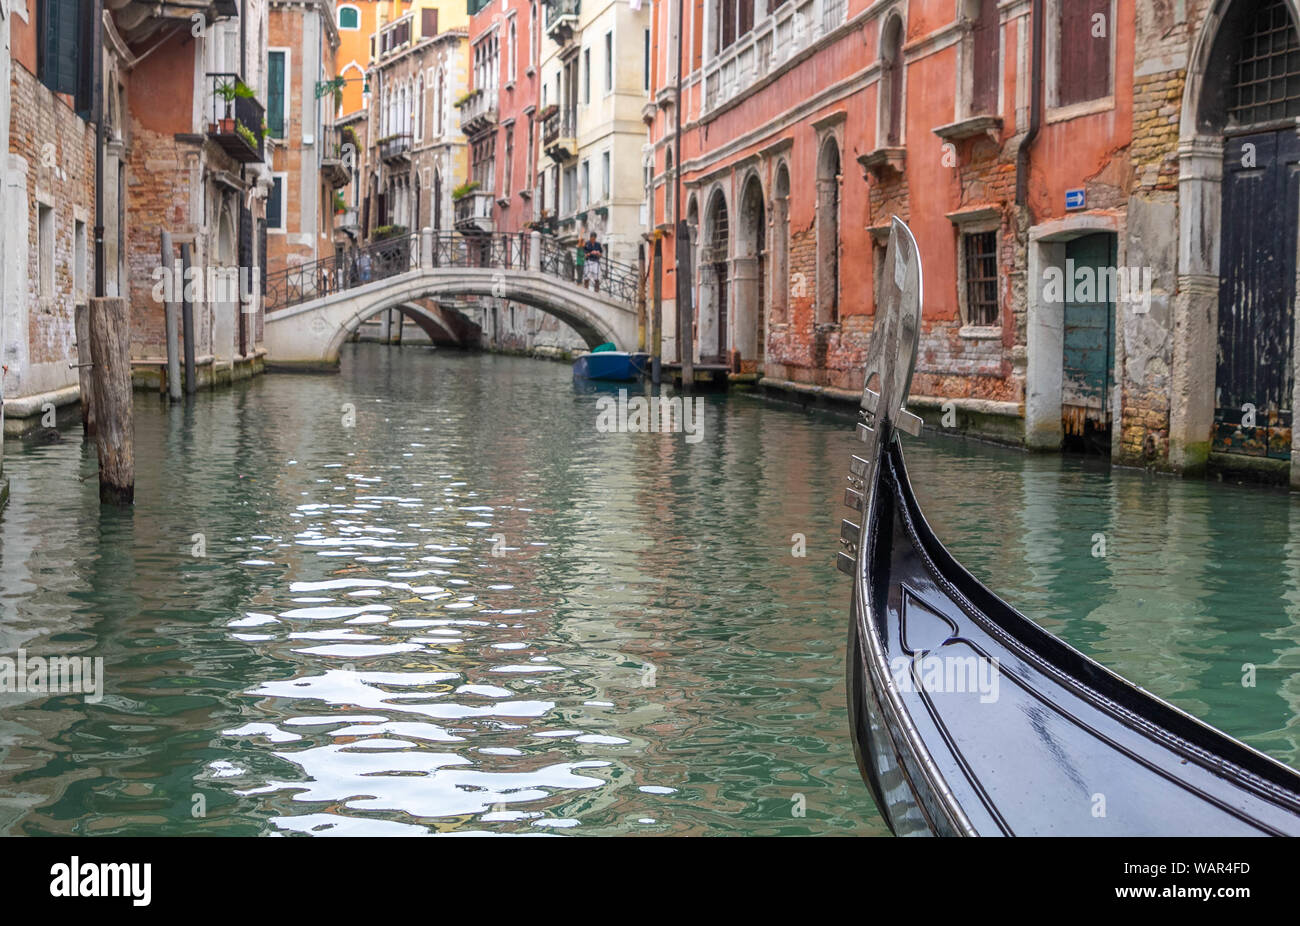 The bow of a gondola, depicting no gondolier, navigating one canal at Venice Stock Photo